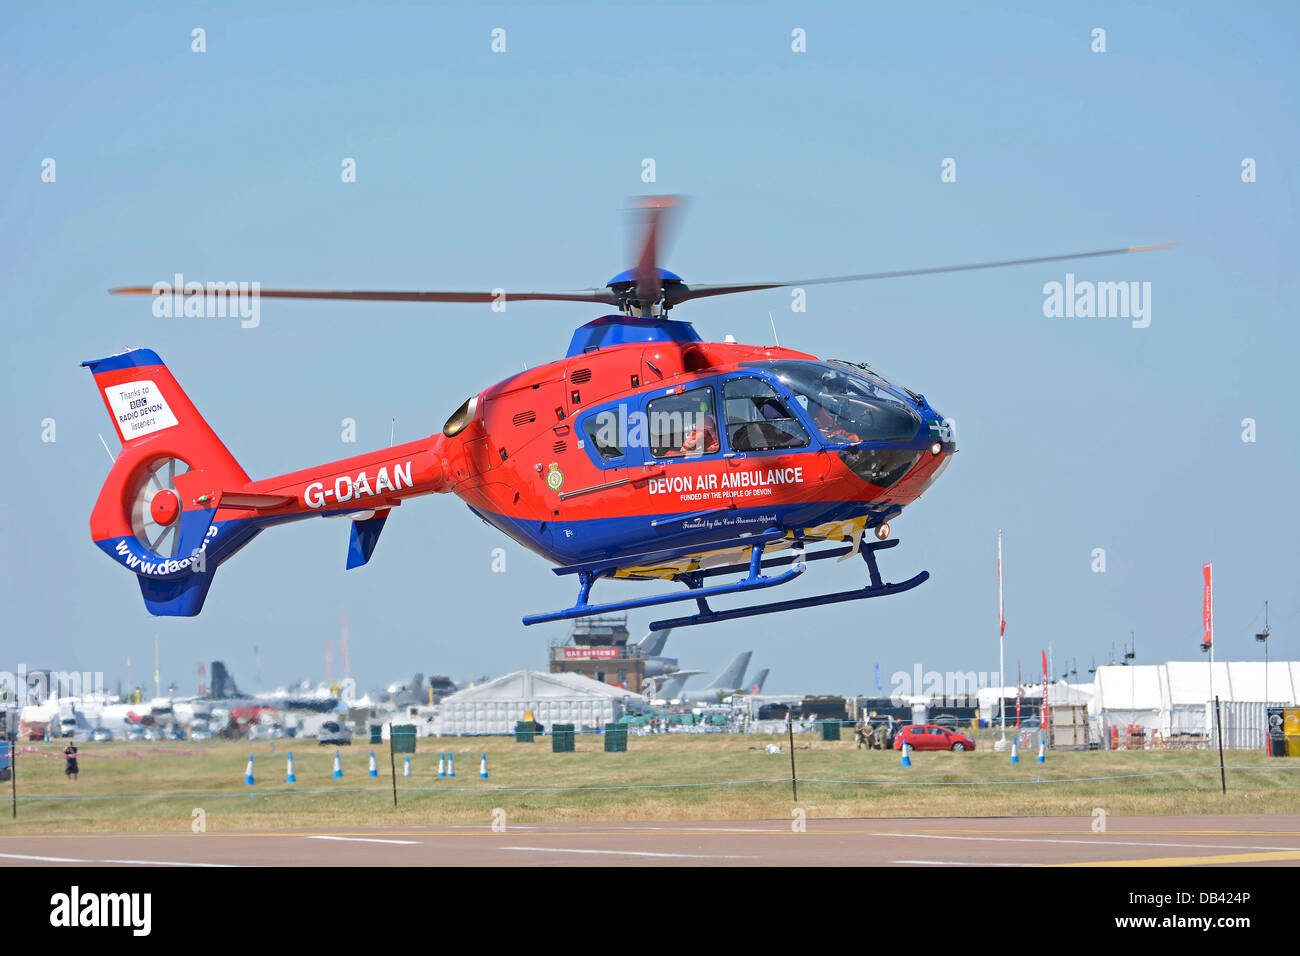 EUROCOPTER EC145 OF THE DEVON AIR AMBULANCE IN THE UK Stock Photo